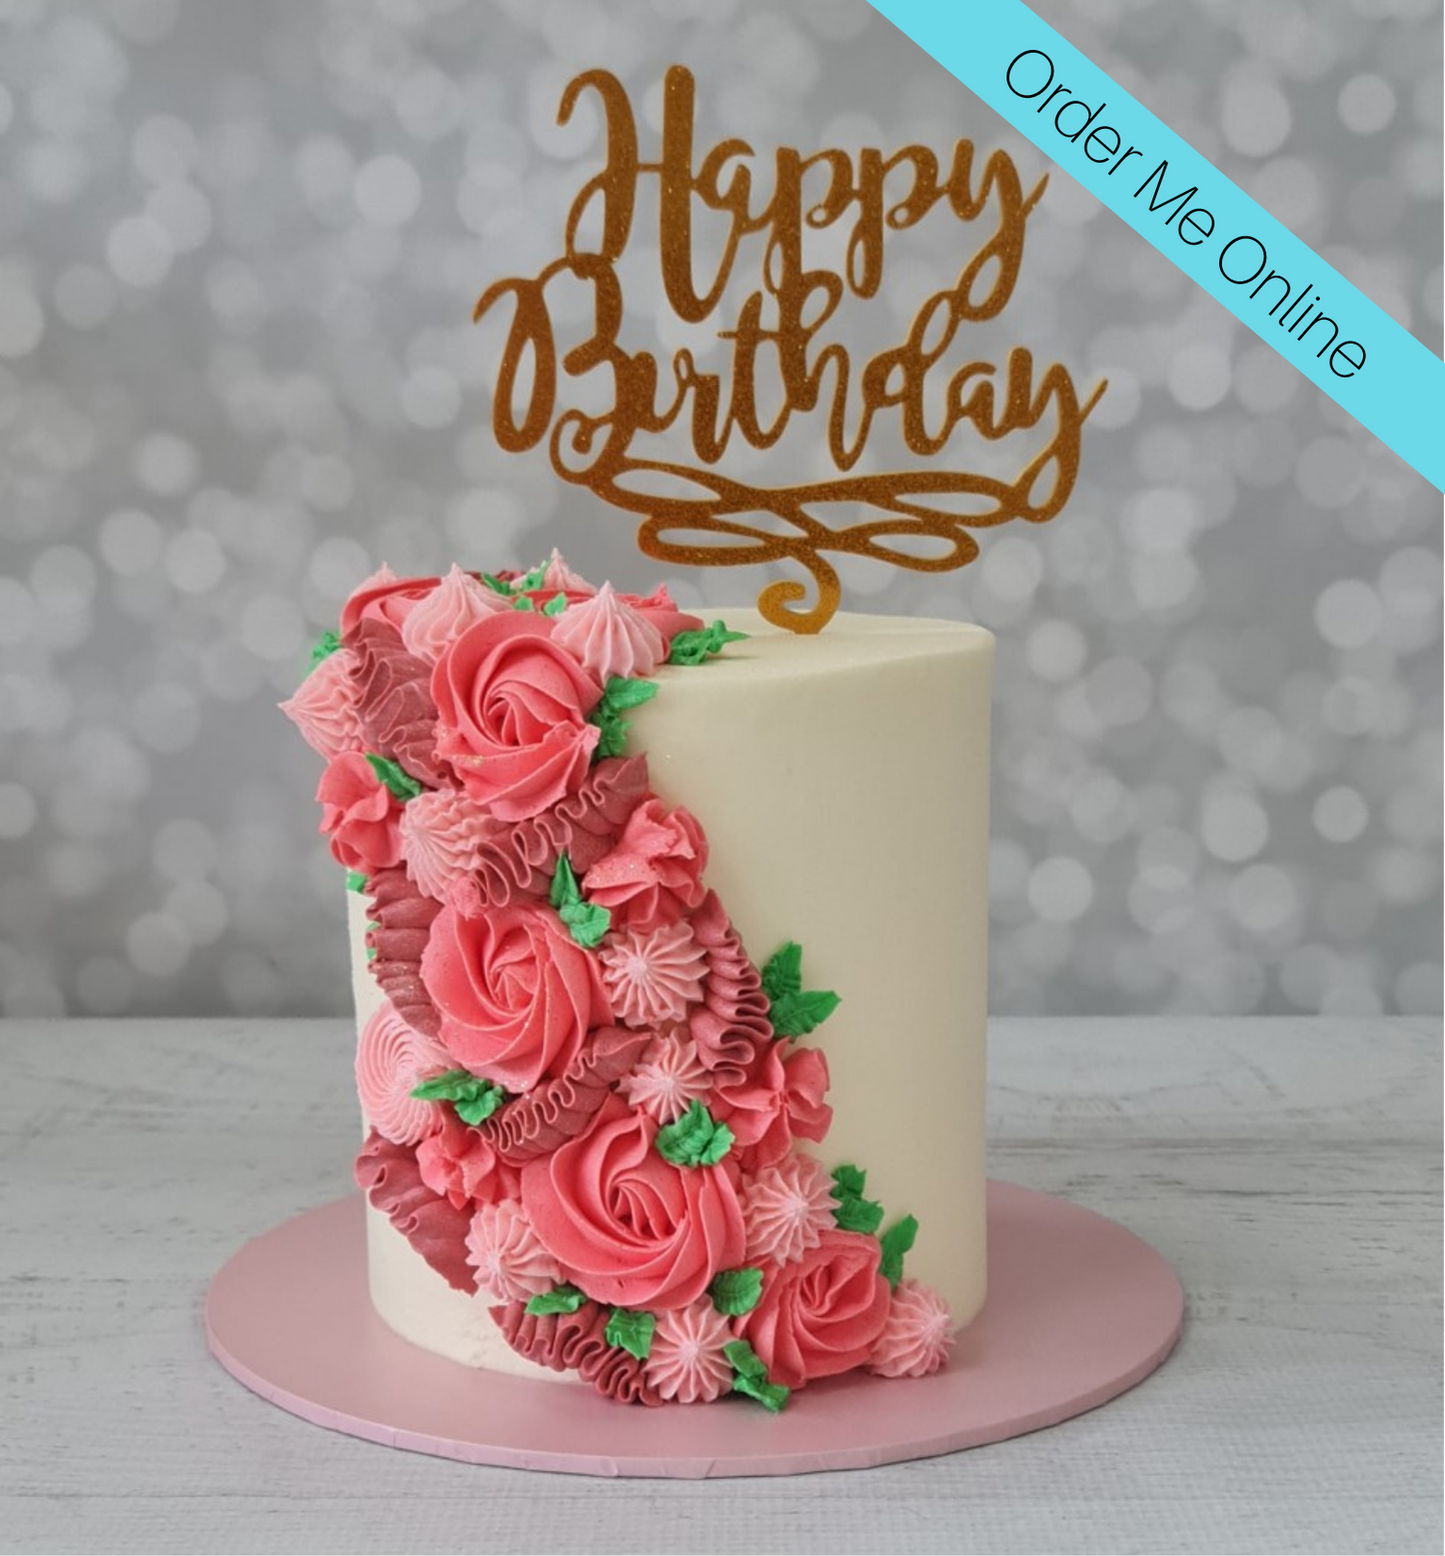 Women's Day Cakes | Happy Womens Day Cake Online | Order Now